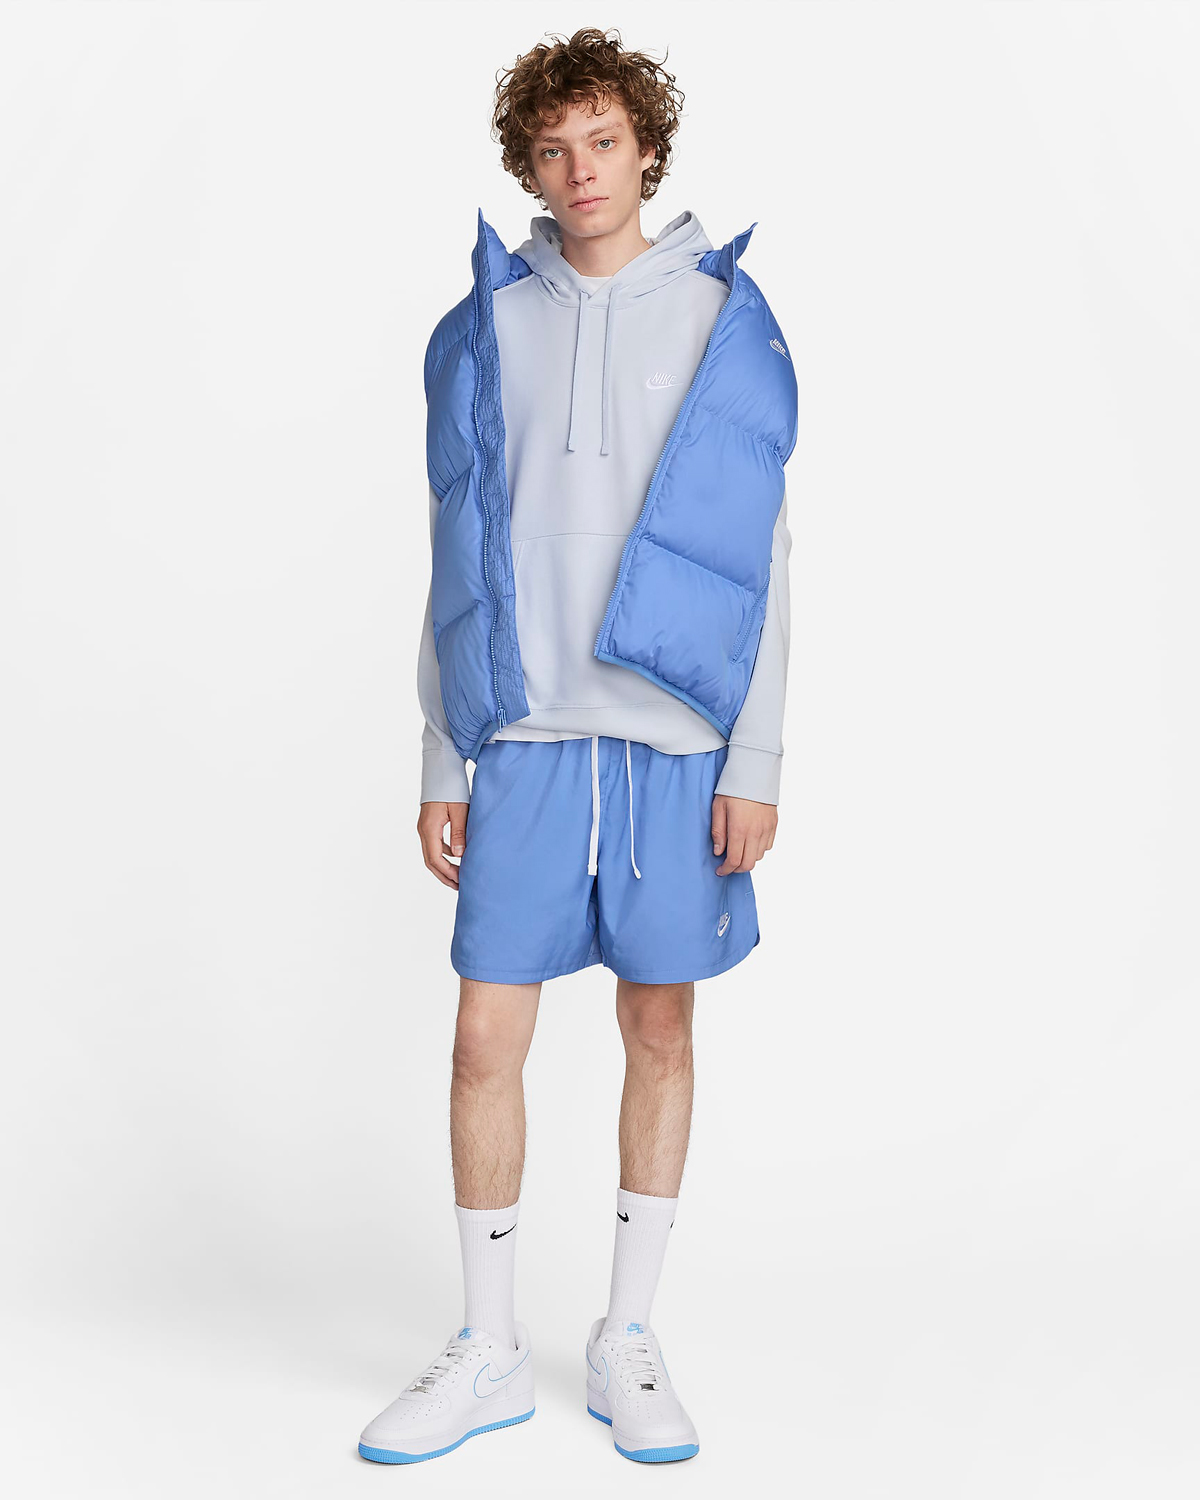 Nike-Sportswear-Essentials-Woven-Lined-Flow-Shorts-Polar-Blue-Outfit